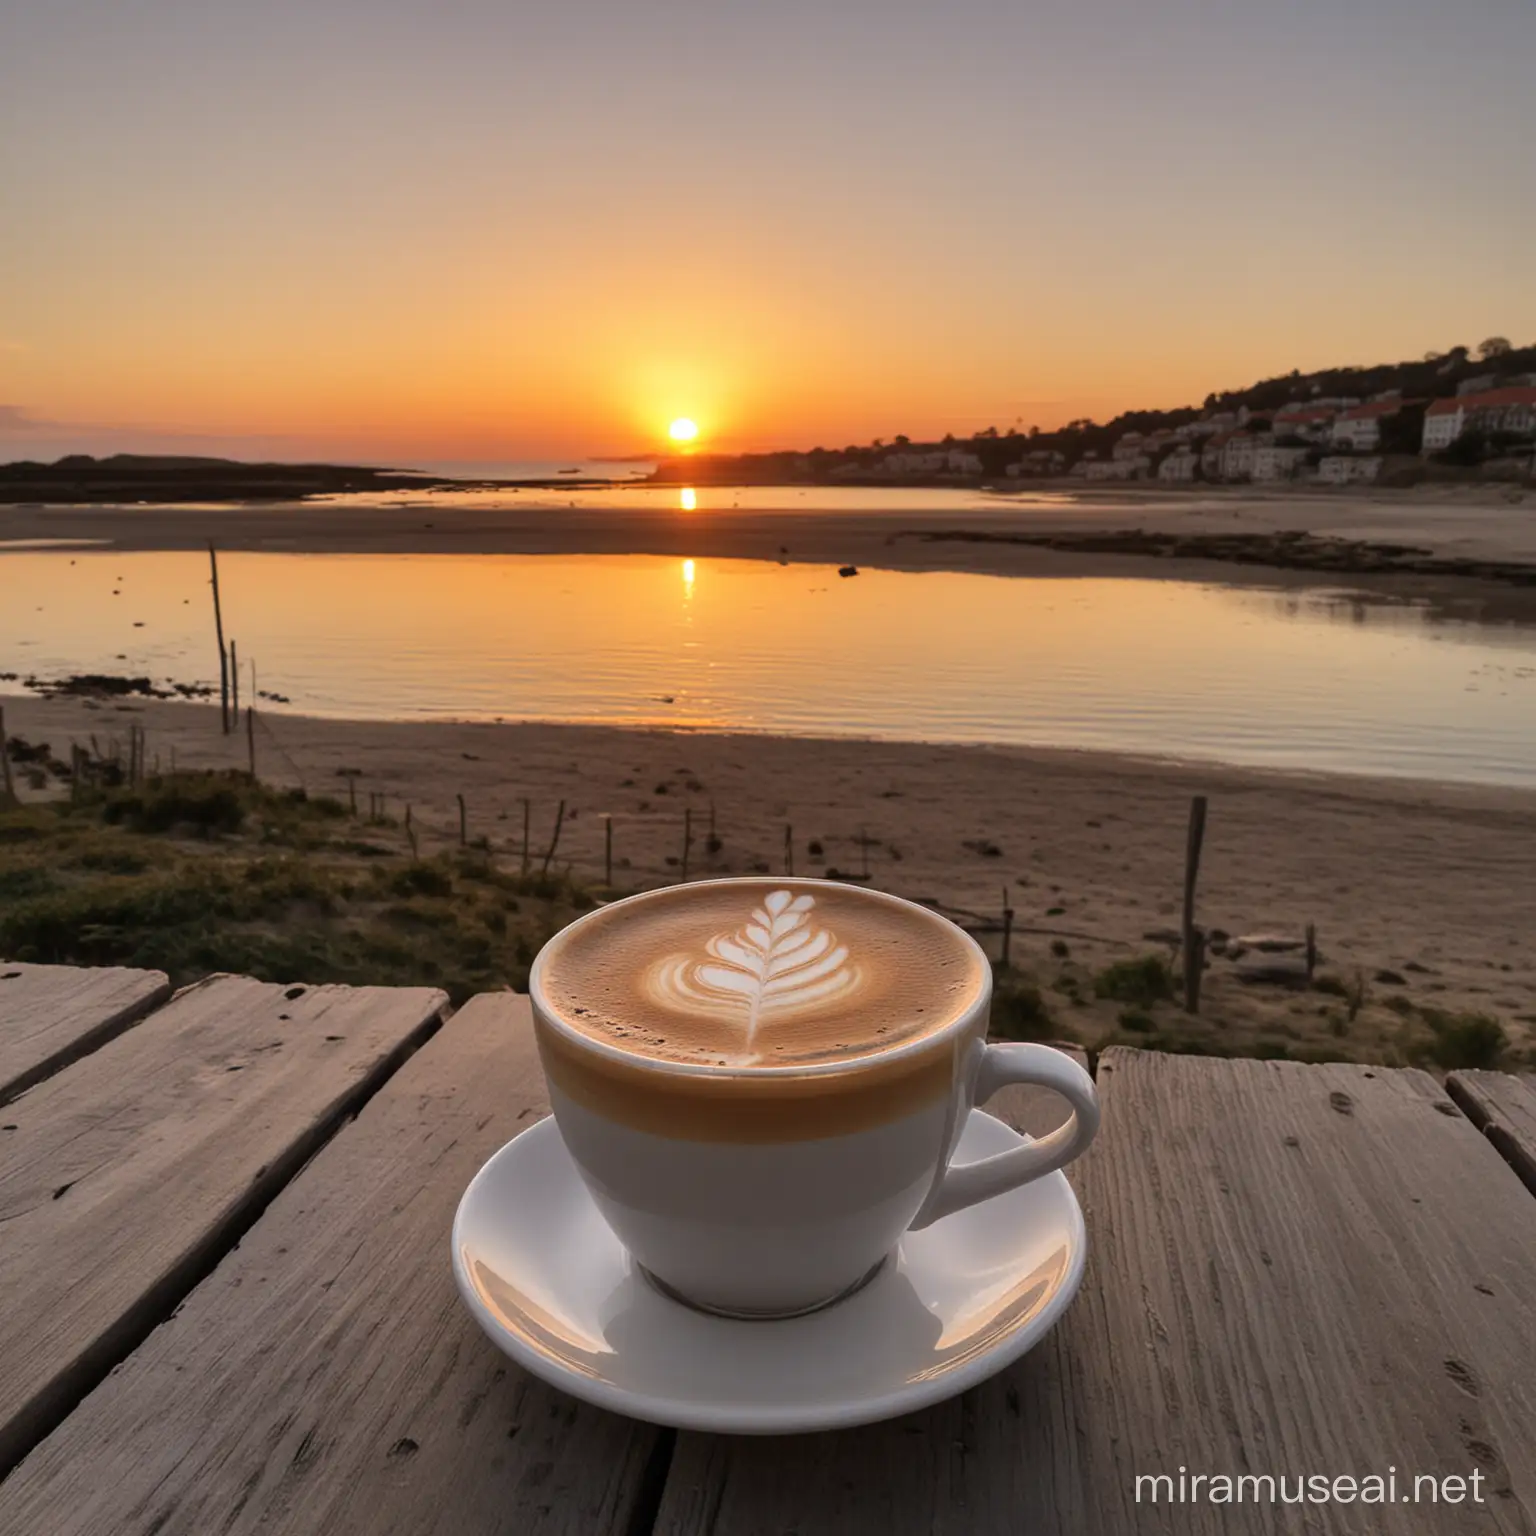 coffee in sunset
